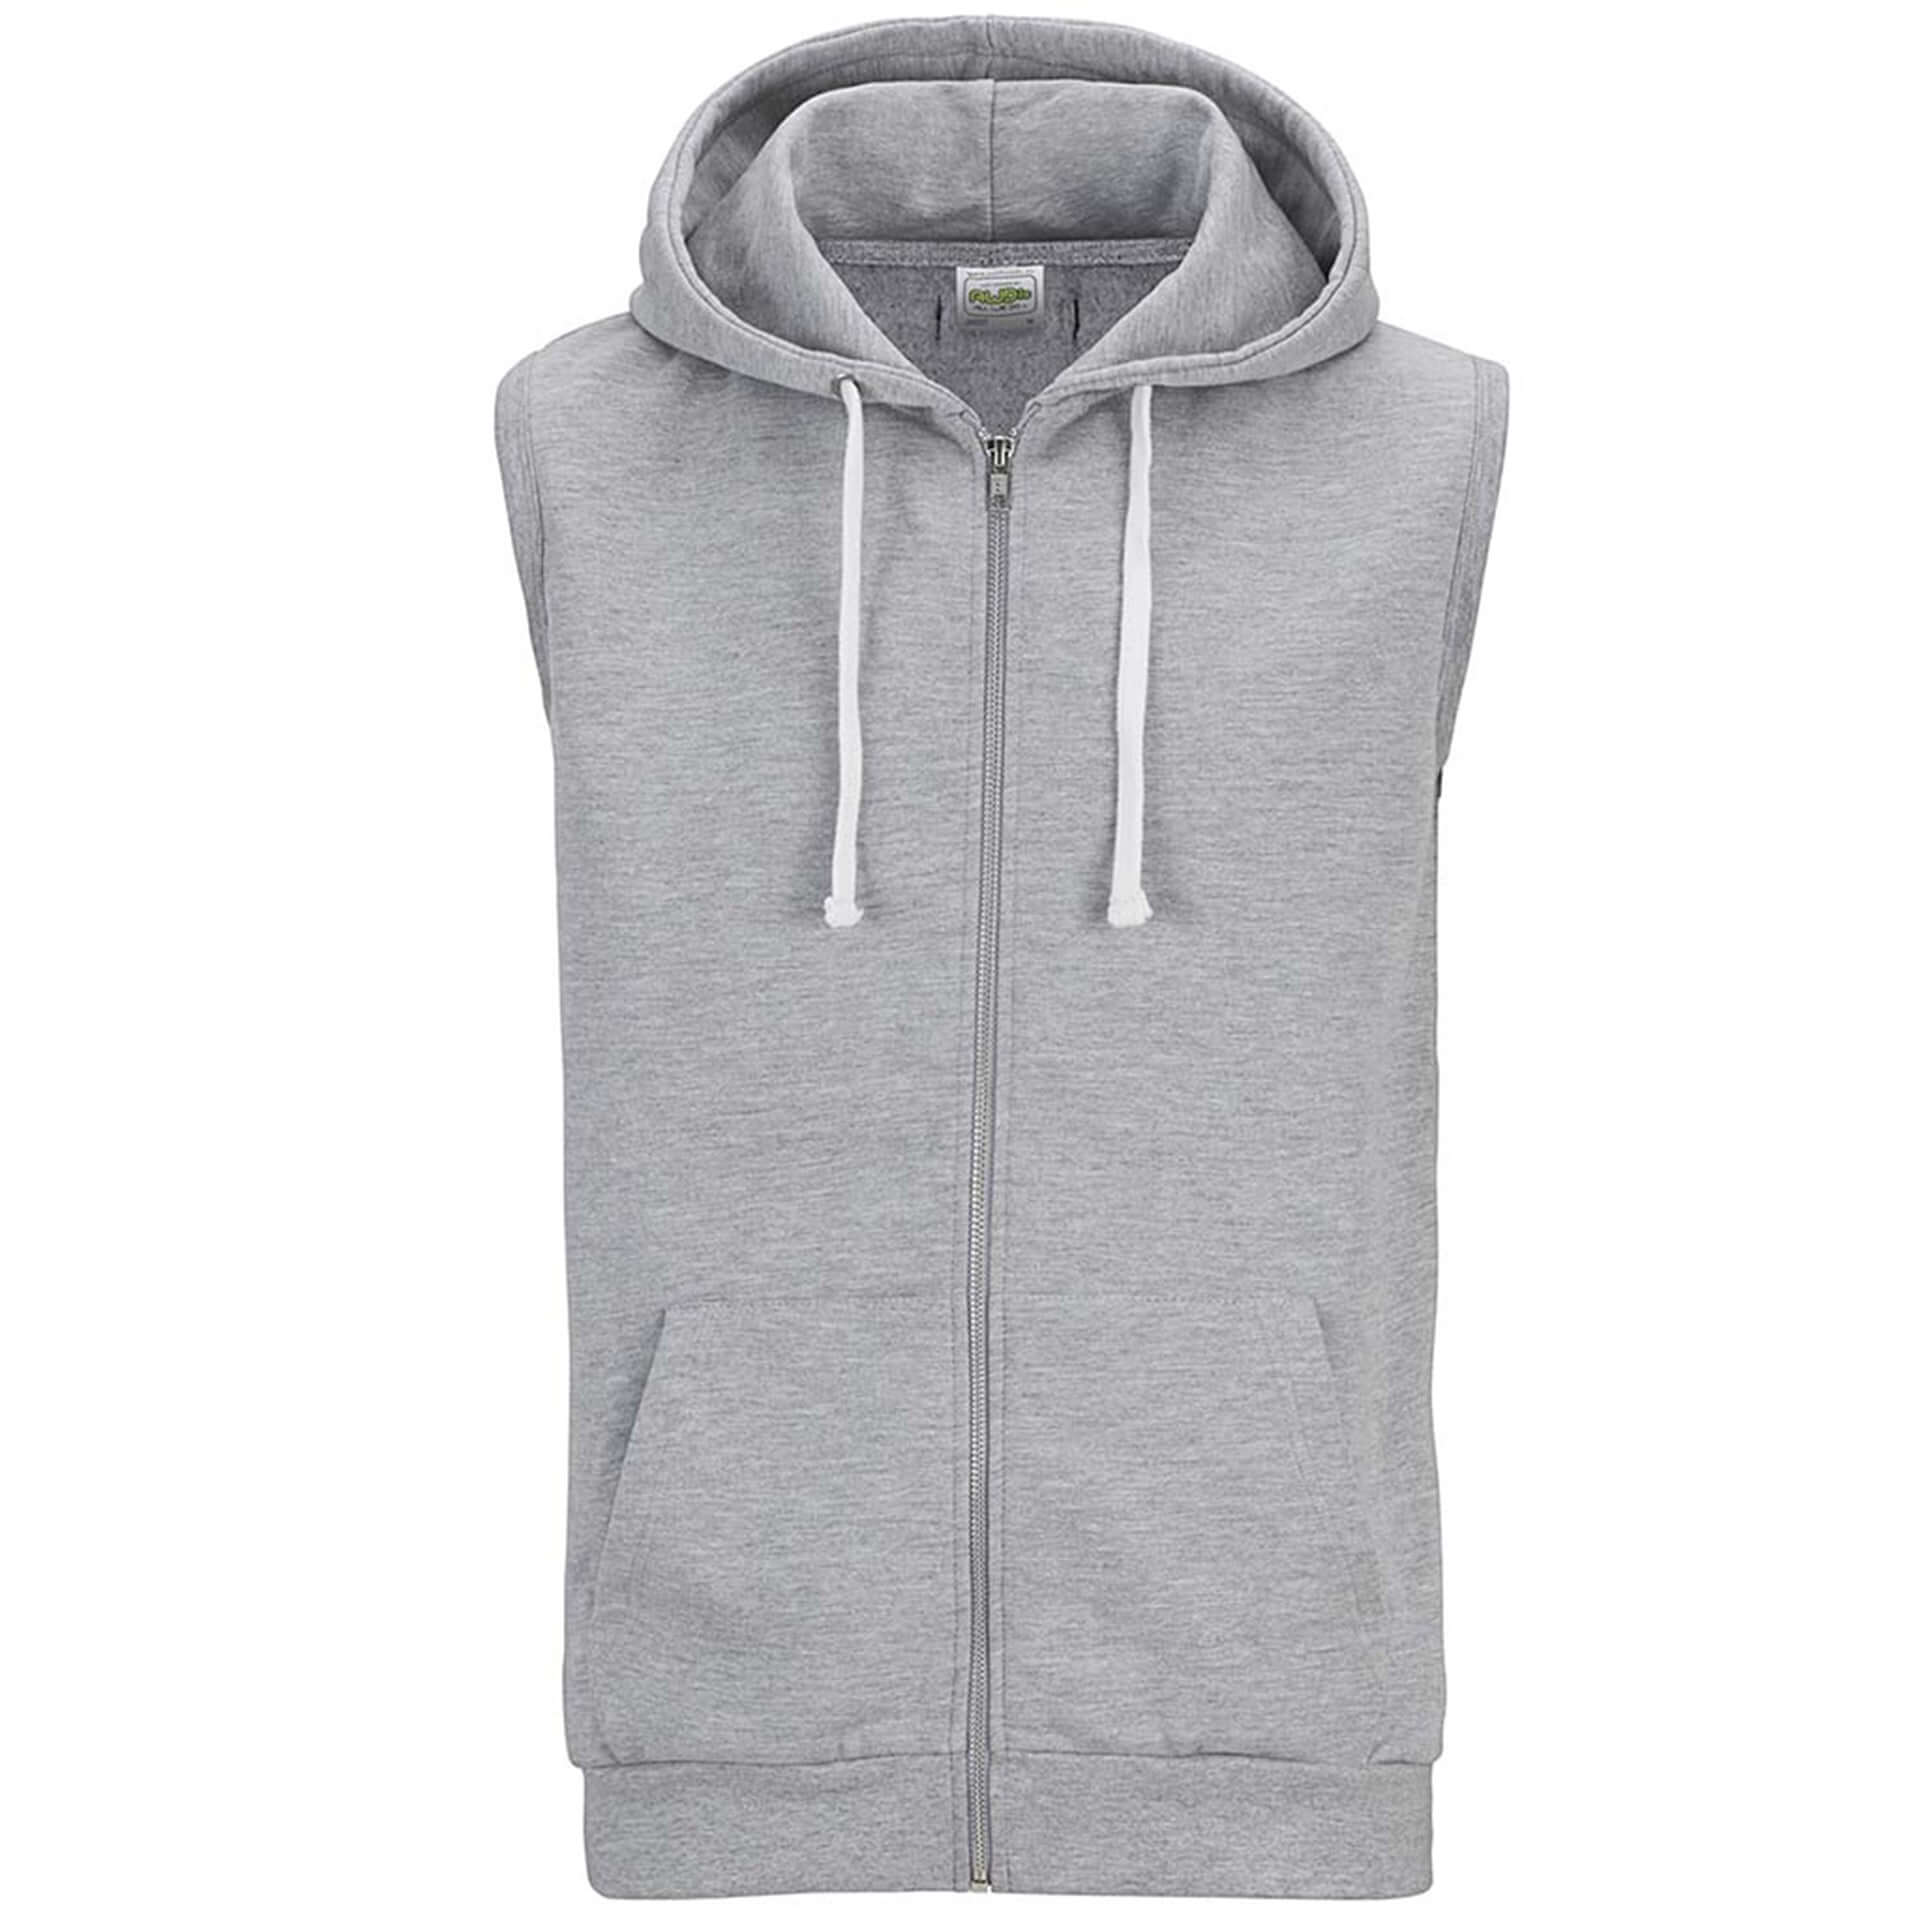 Sleeveless Zoodie front grey